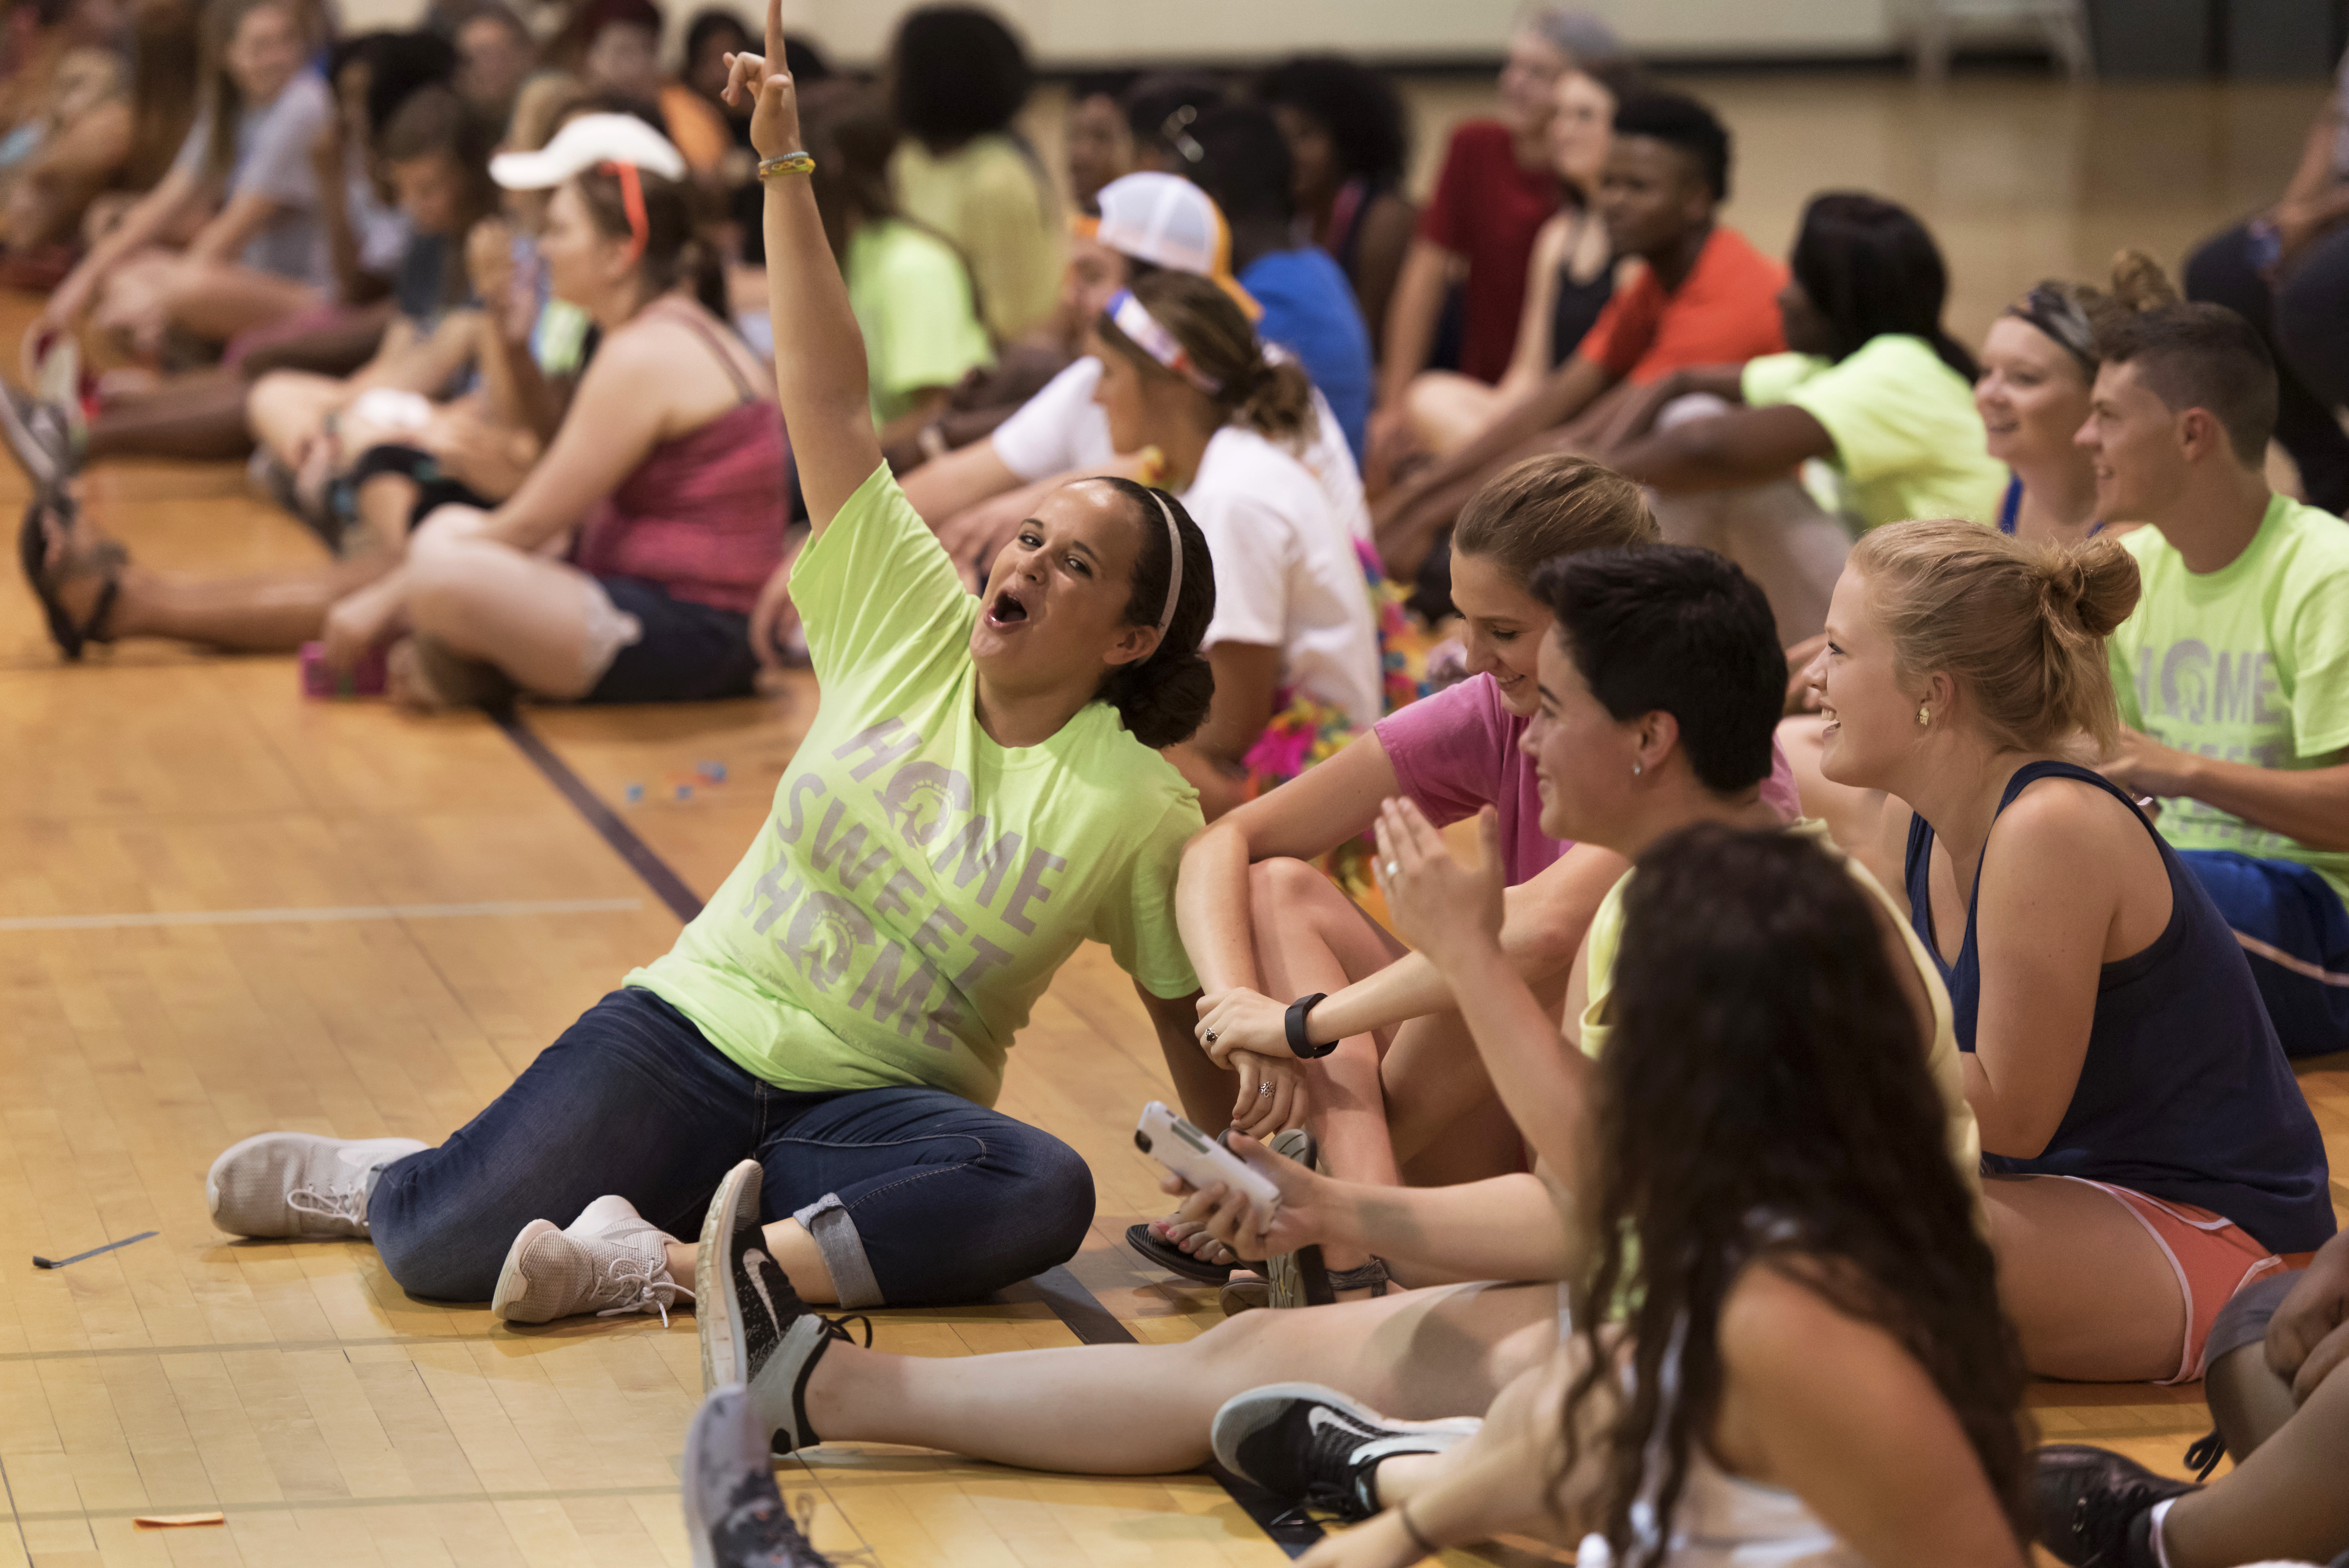 CLC students play games during team building exercises on August 13, 2015 in the athletic field house.